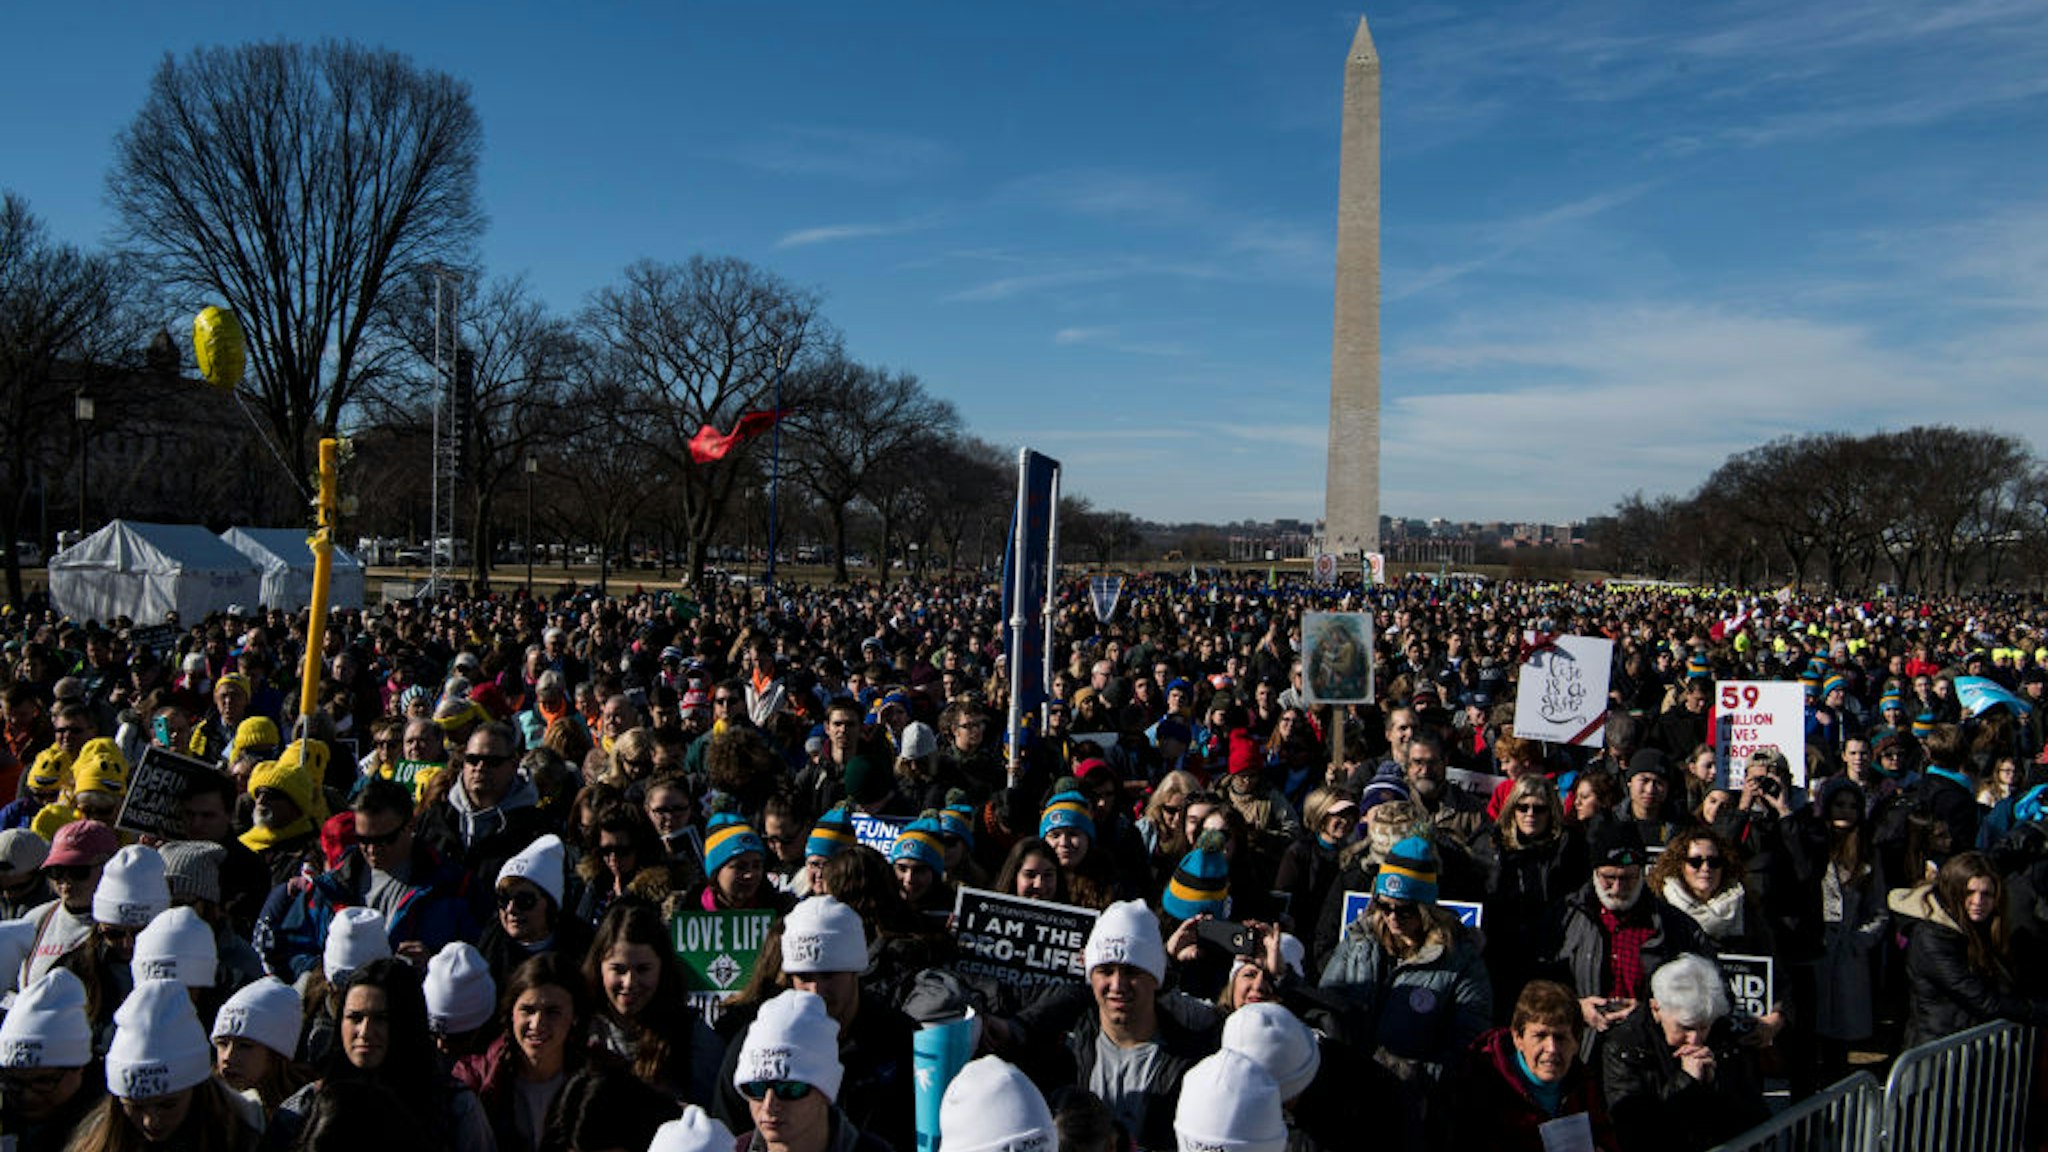 WASHINGTON, DC - JANUARY 19: Thousands of people gather on the National Mall during the March for Life, the world's largest annual pro-life demonstration, in Washington, DC on January 19, 2018. Over one hundred thousand people are expected to attend the 45th annual March for Life event.